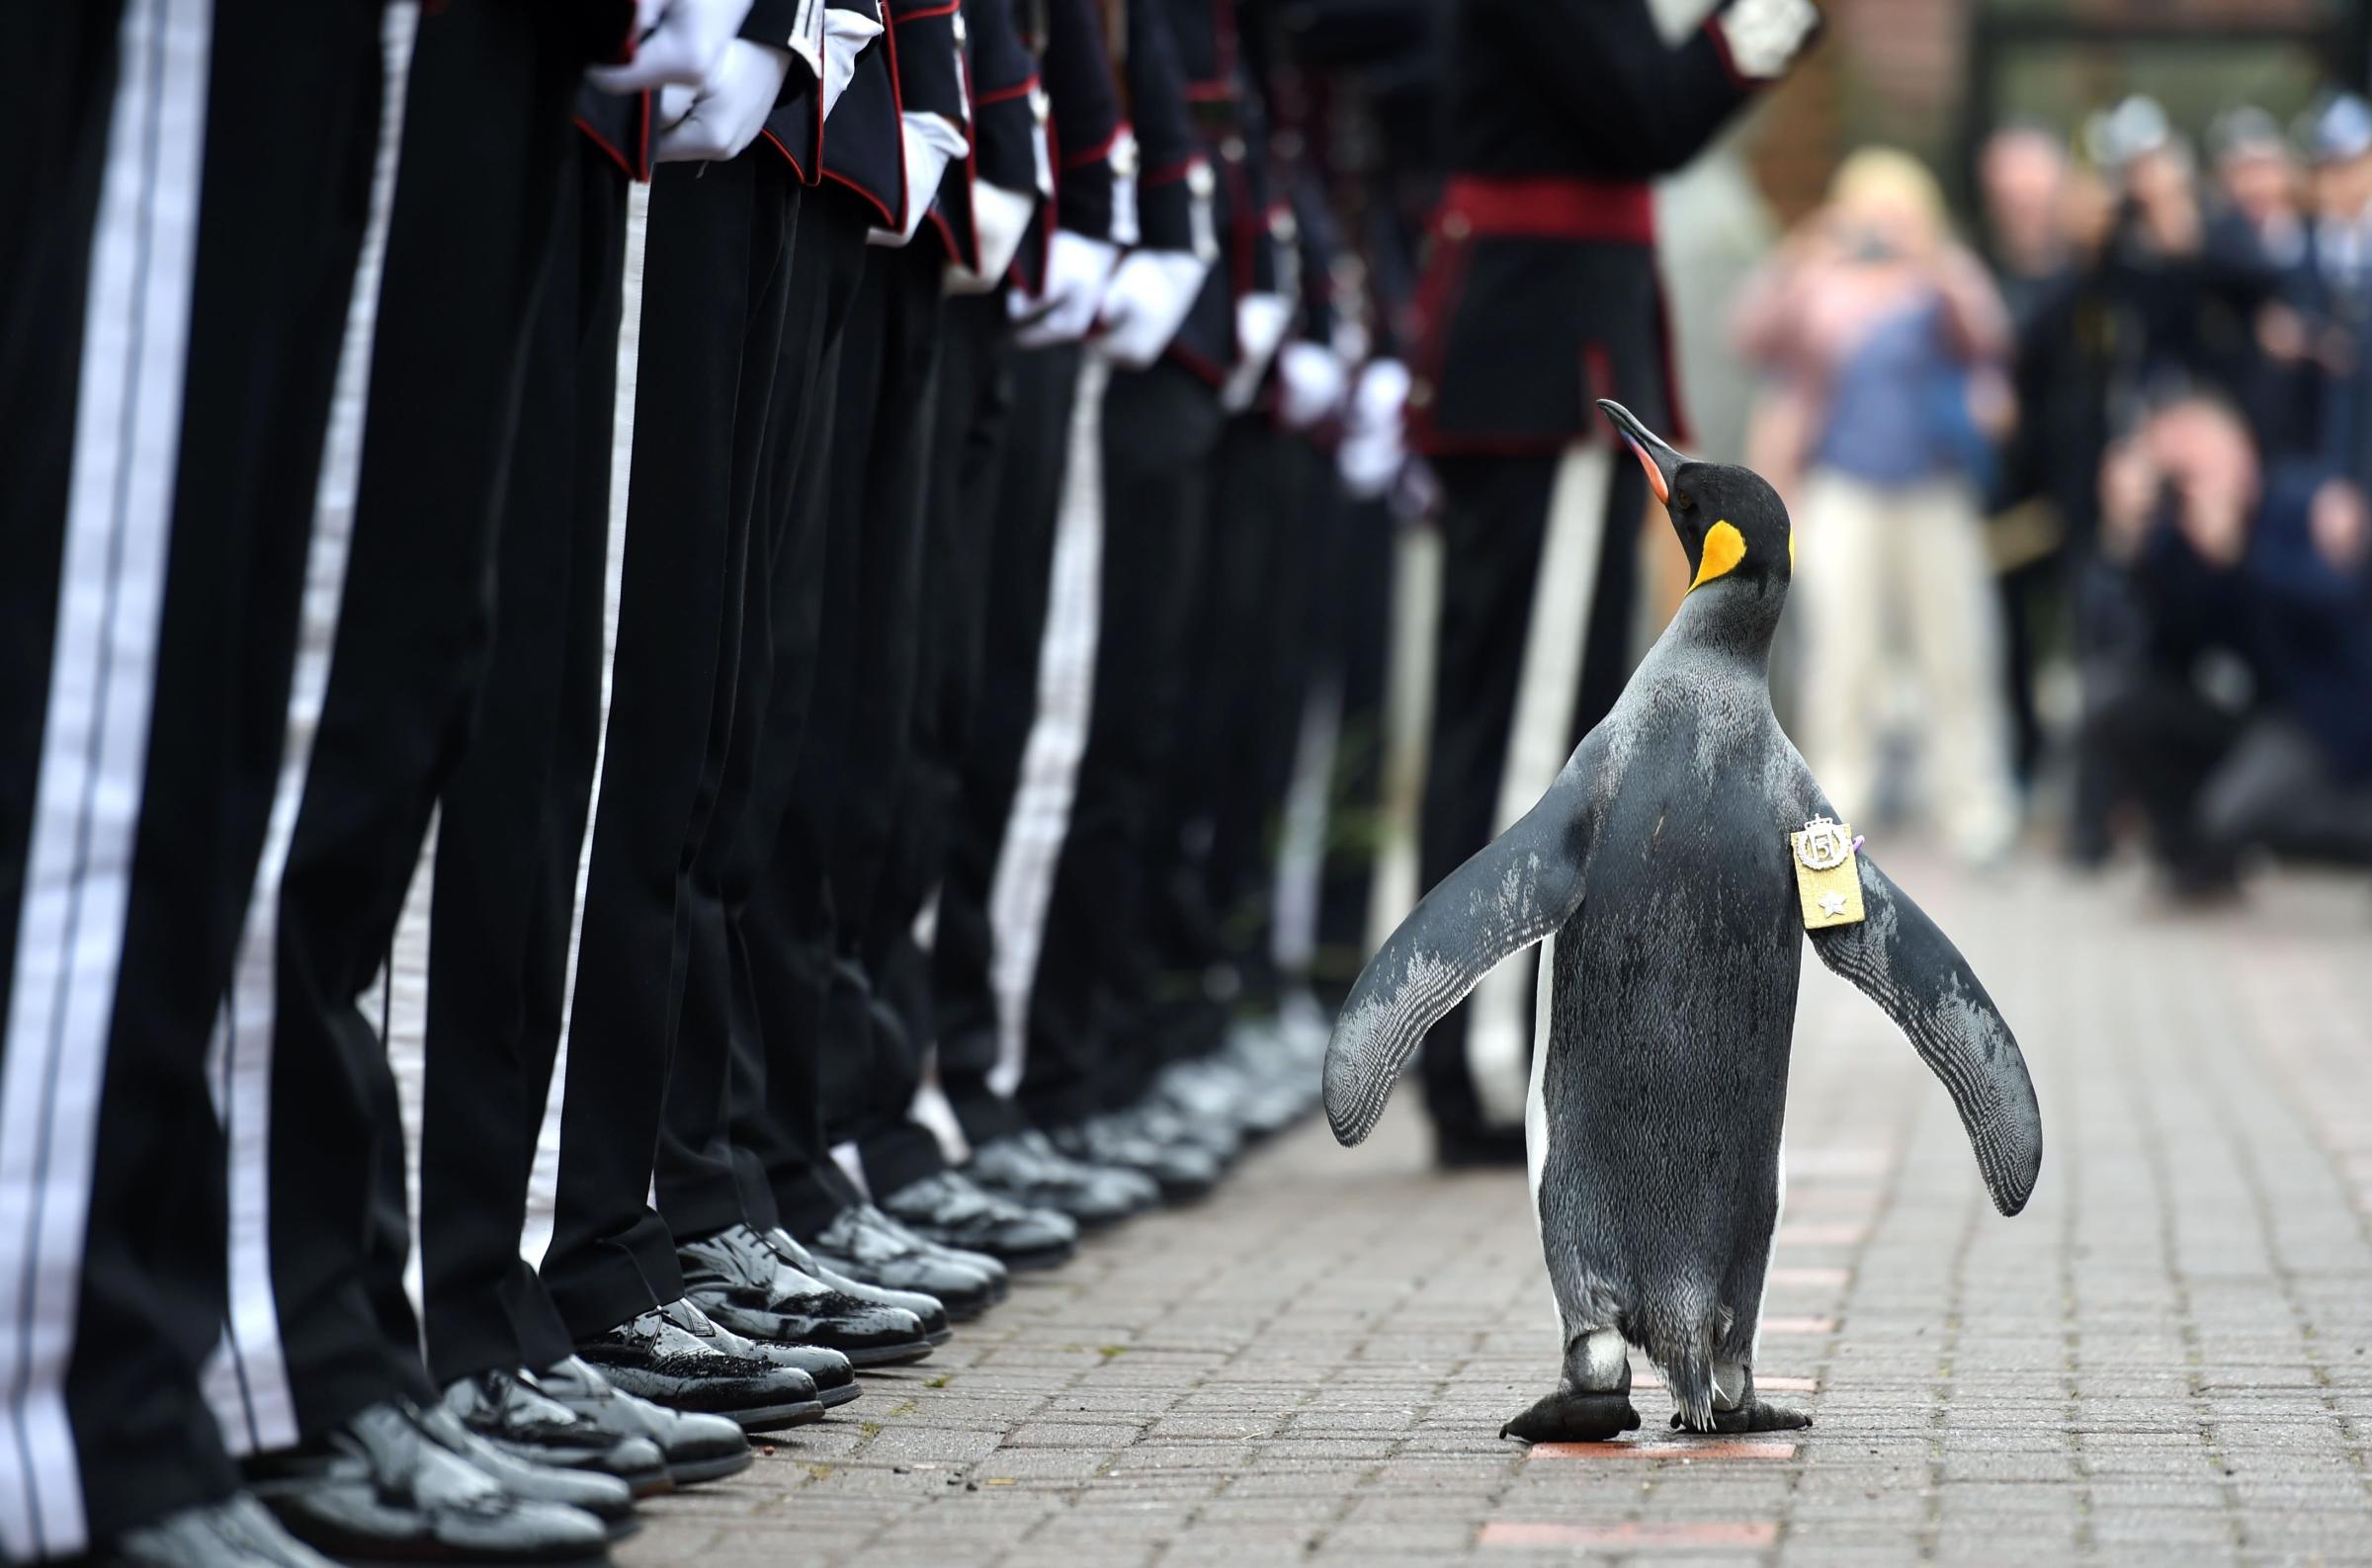 A penguin named Nils Olav inspects the Guard of Honour formed by His Majesty the King of Norway's Guard at Edinburgh Zoo in Scotland, on Aug. 22, 2016.